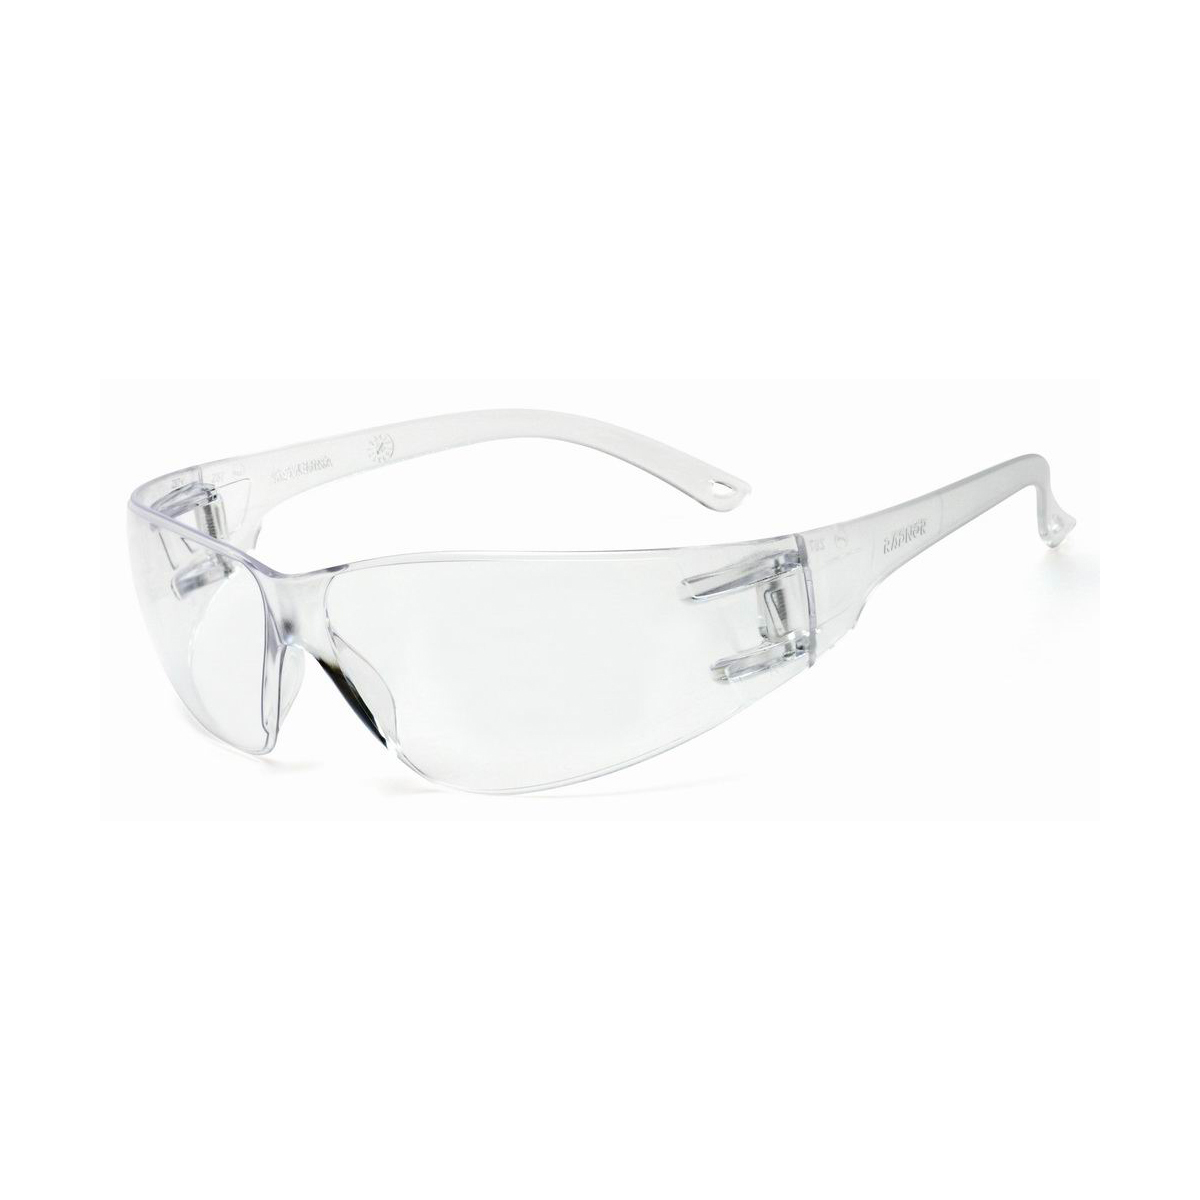 Safety Goggle Industrial Eye Protection with Replaceable Polycarbonate Lens 